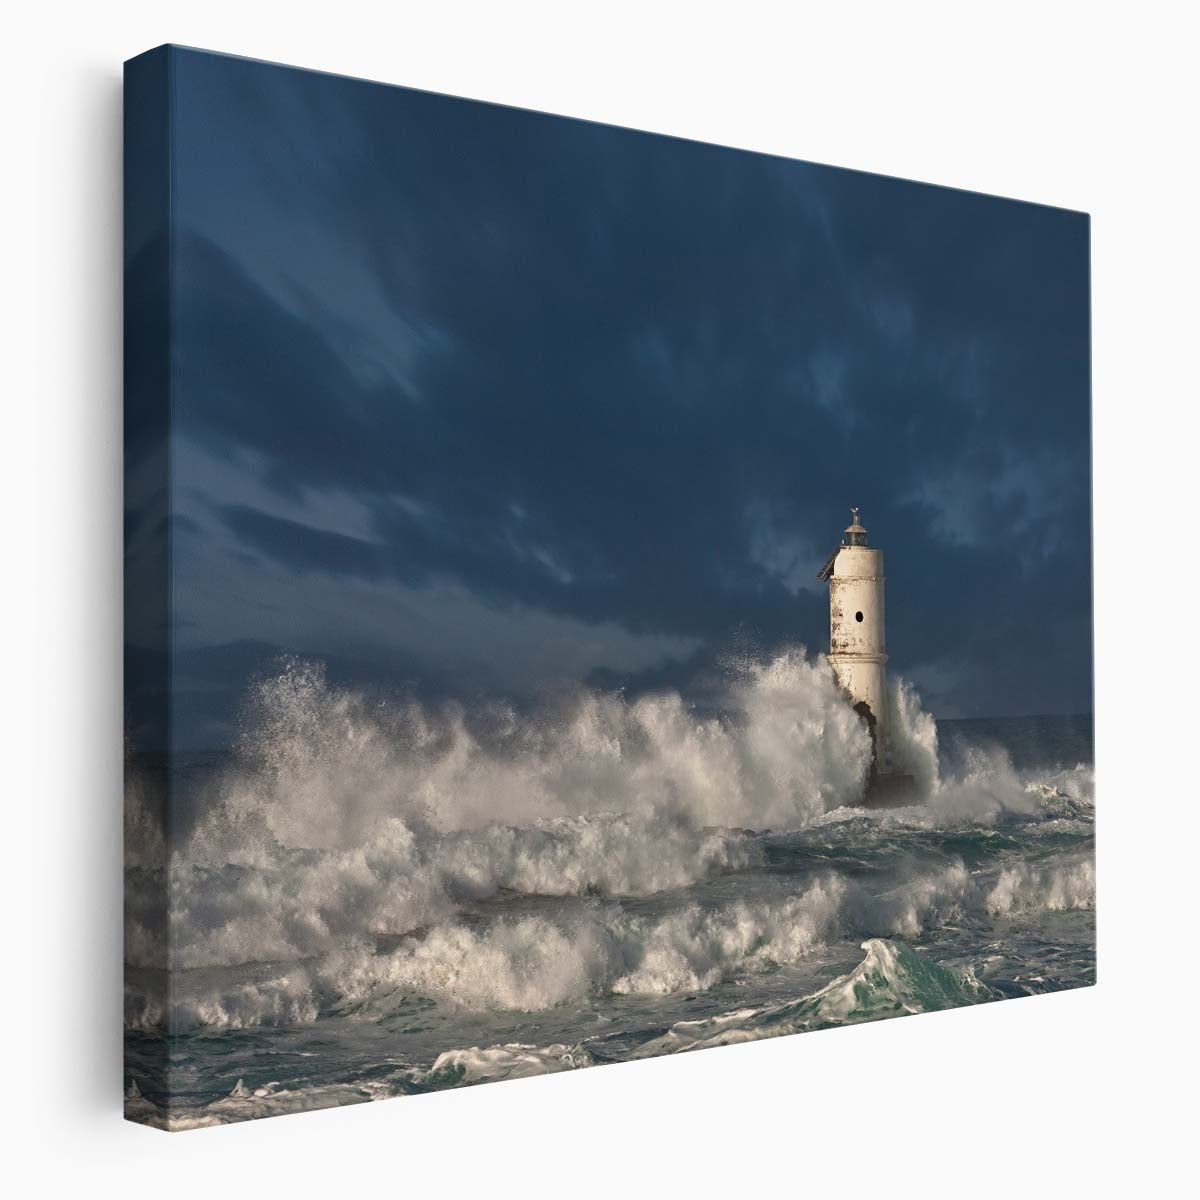 Mangiabarche Sardinia Lighthouse Seascape Storm Wall Art by Luxuriance Designs. Made in USA.